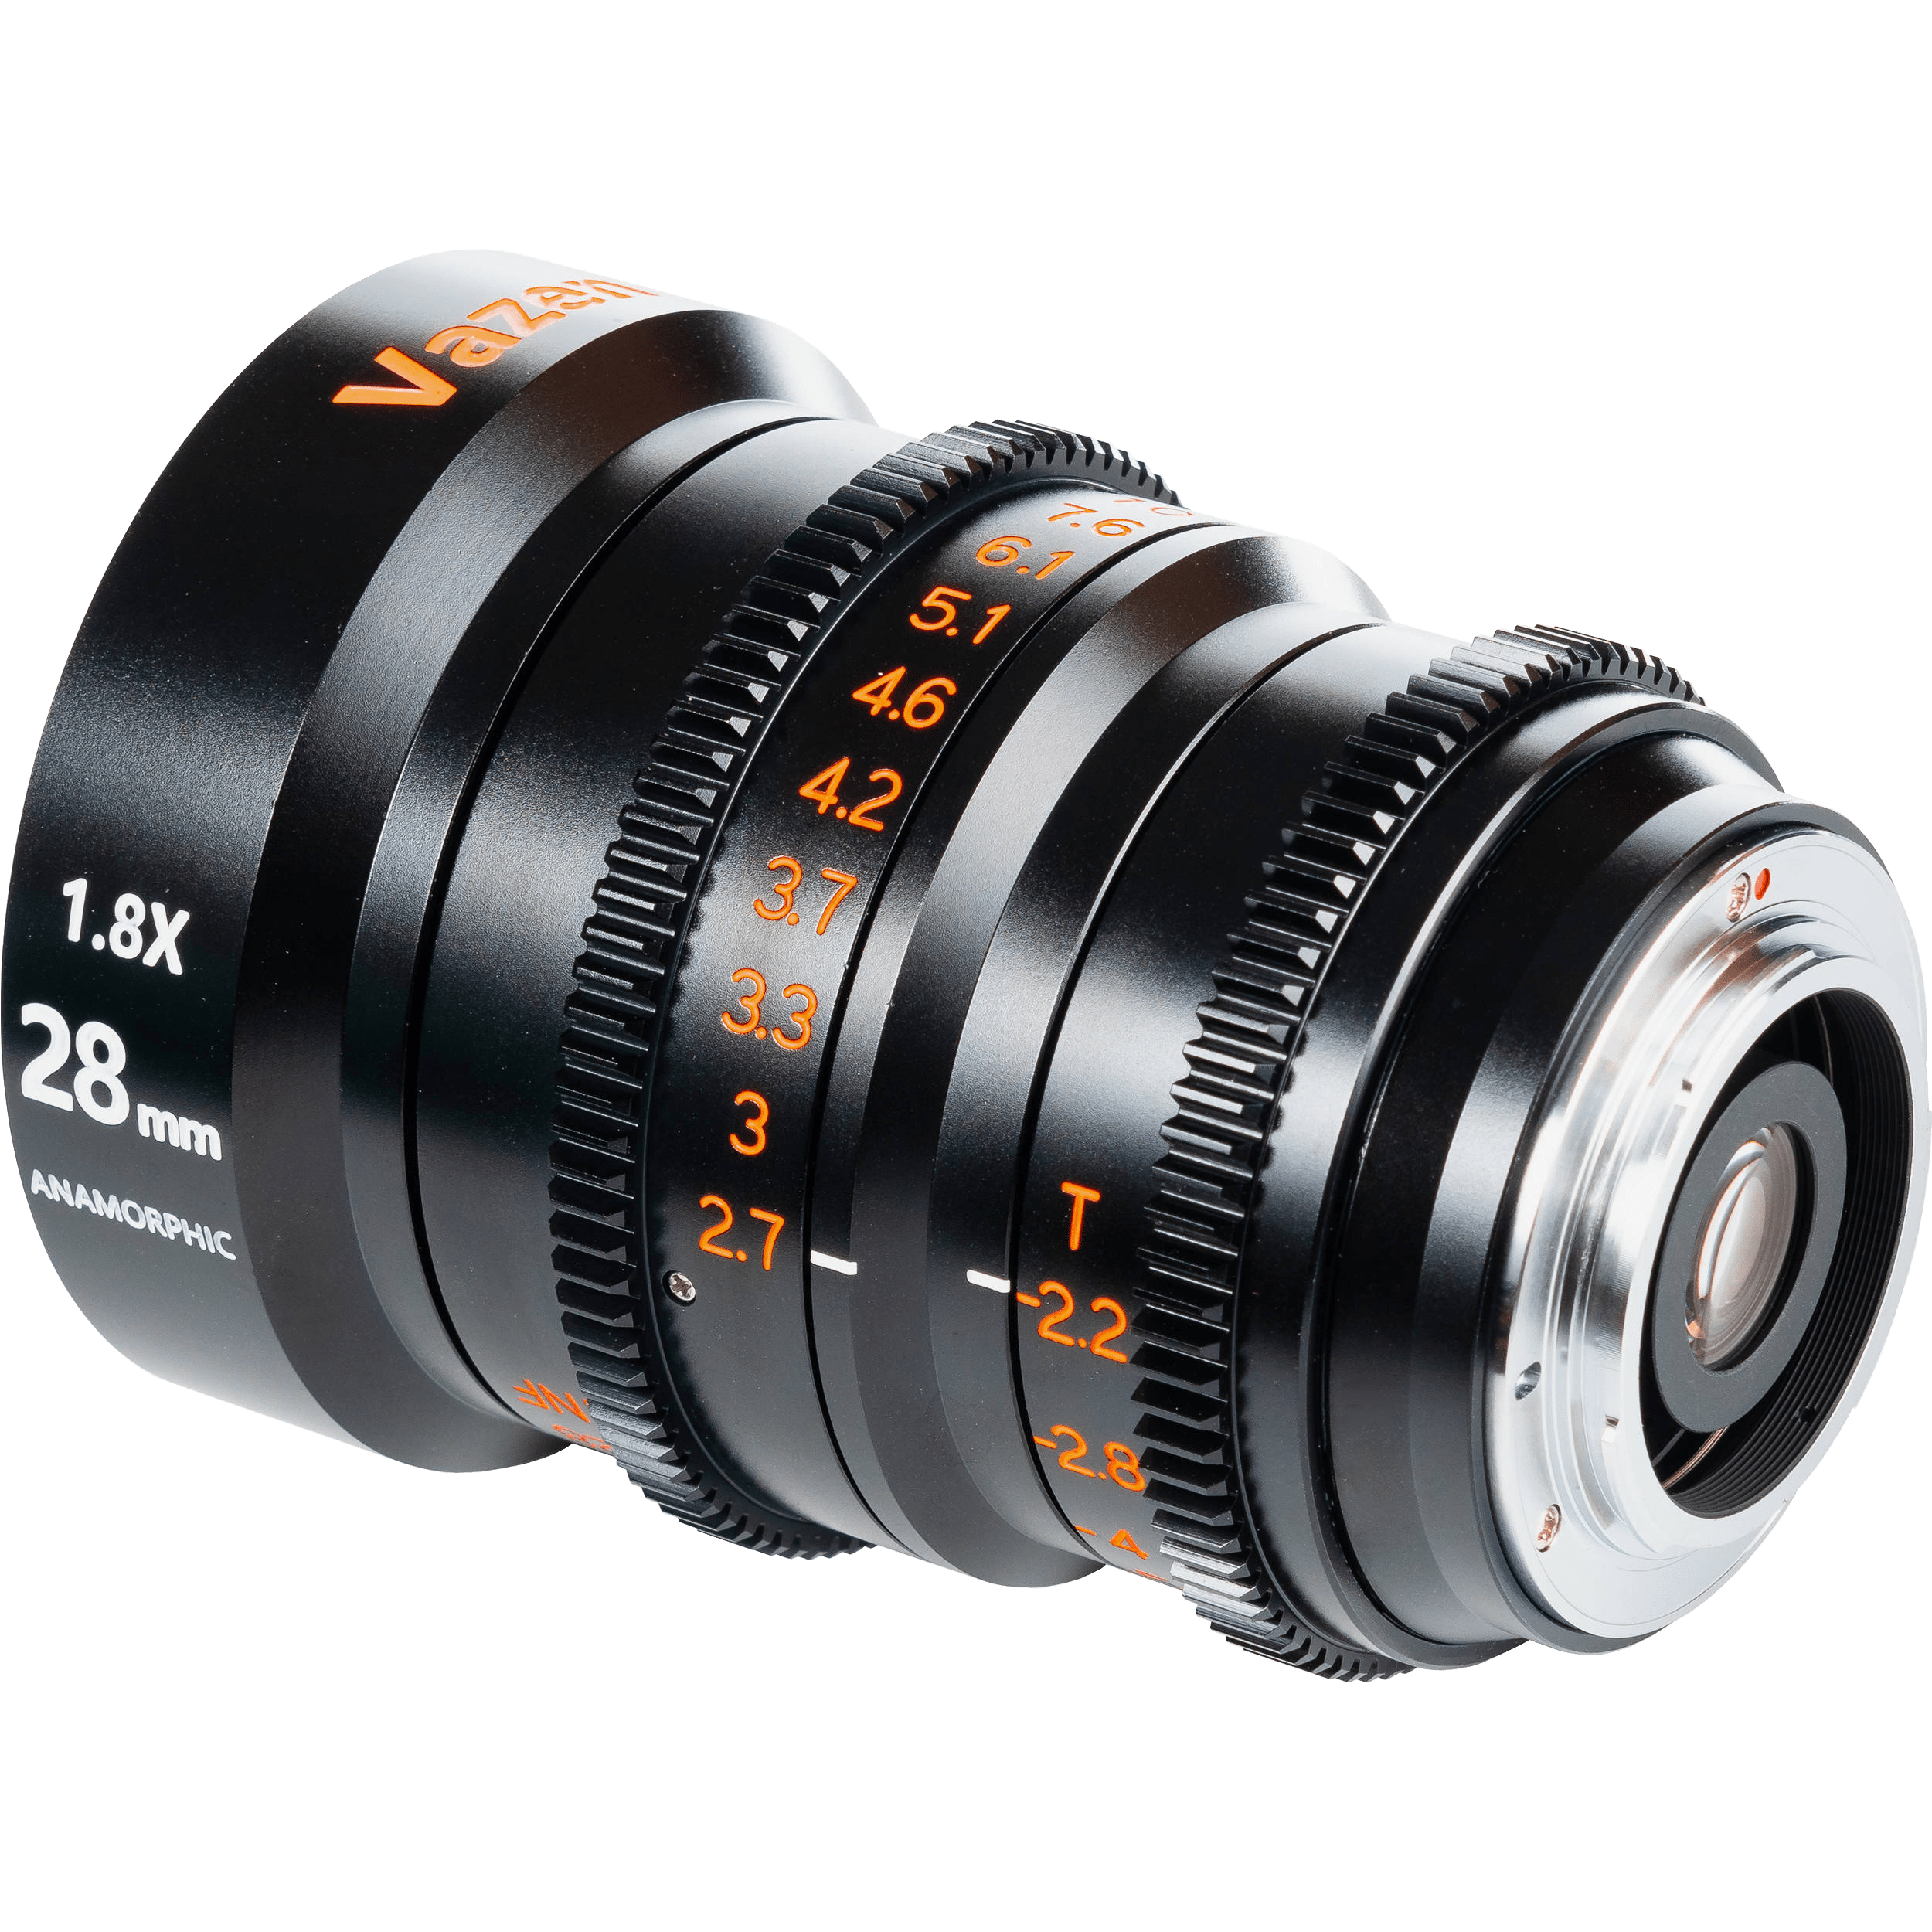 Vazen 28mm T/2.2 1.8X Anamorphic Lens for Canon RF Camera in a Back-Side View